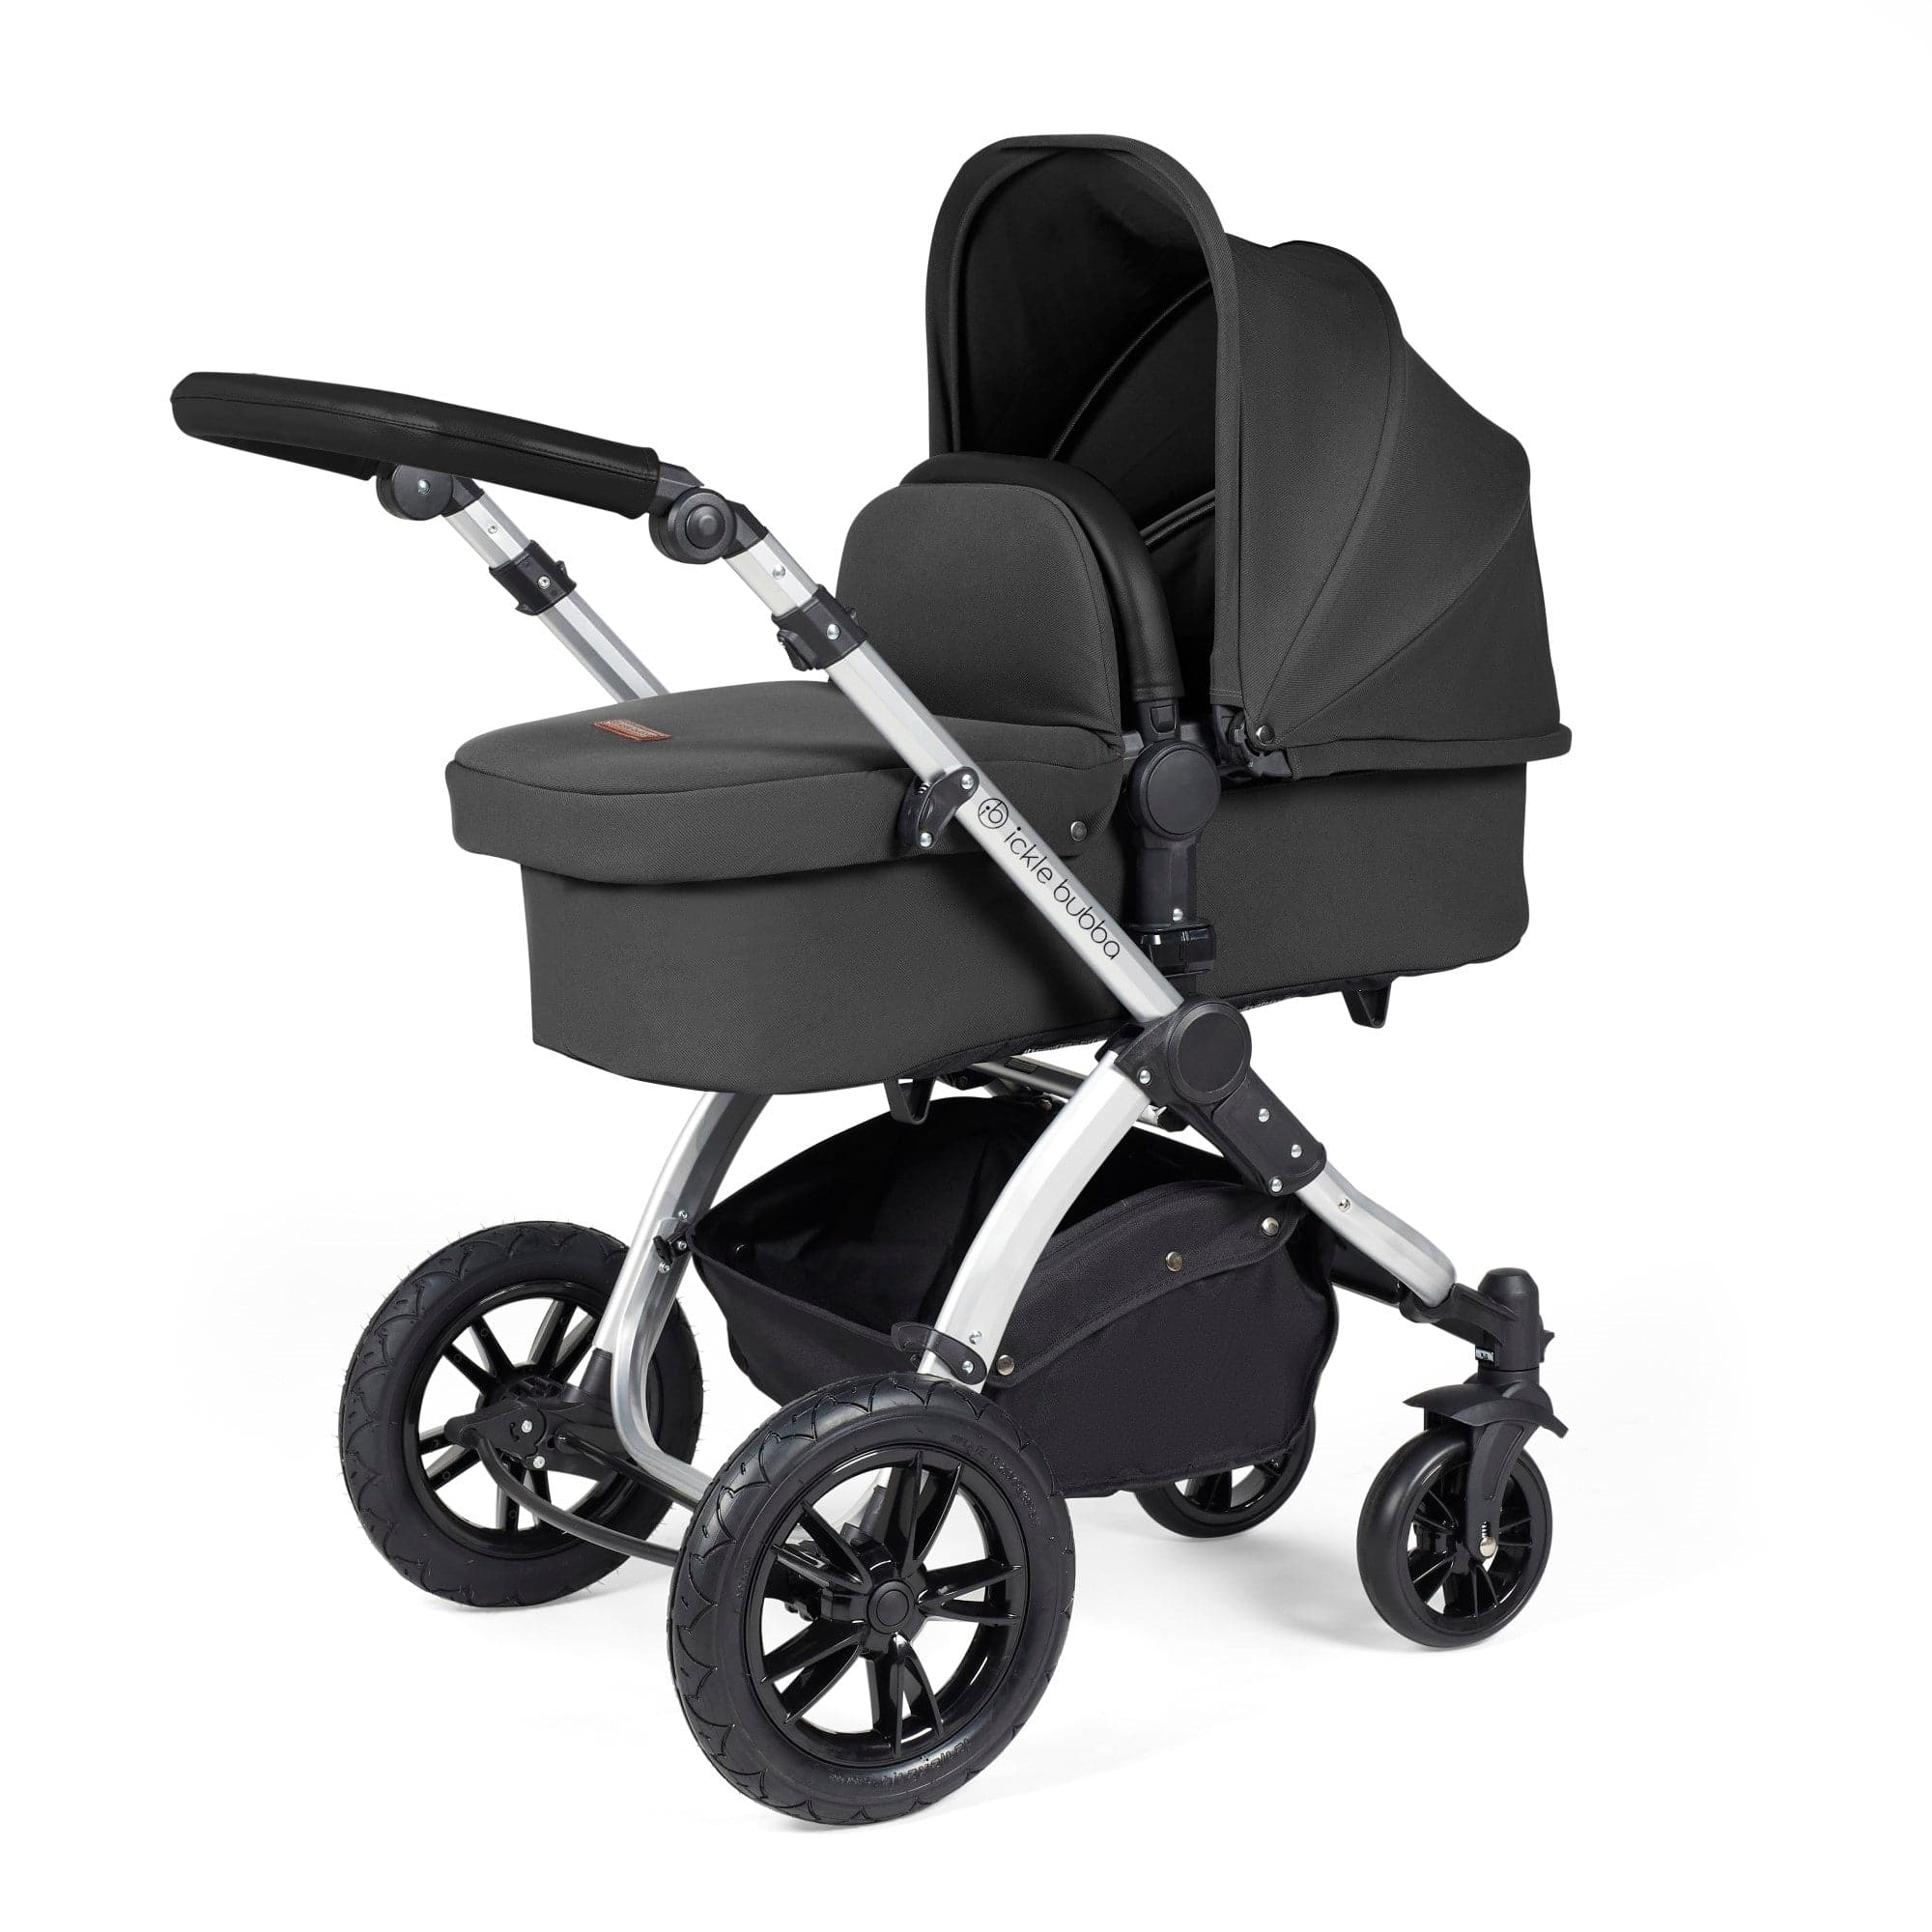 Ickle Bubba Stomp Luxe All-In-One I-Size Travel System With Isofix Base - Silver / Charcoal Grey / Black   